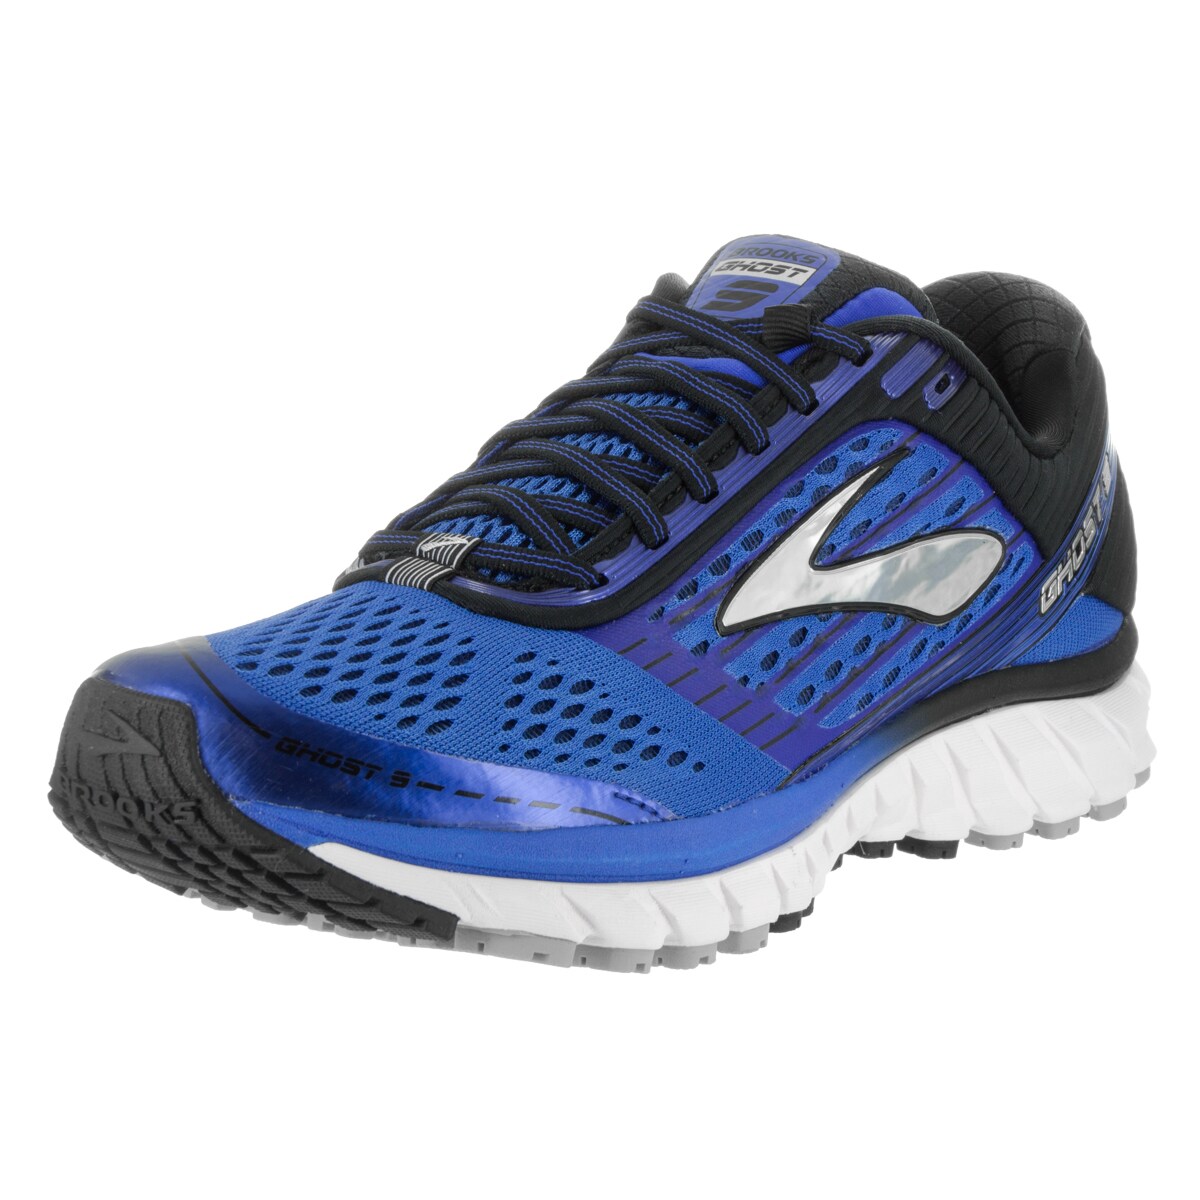 men's ghost 9 running shoes